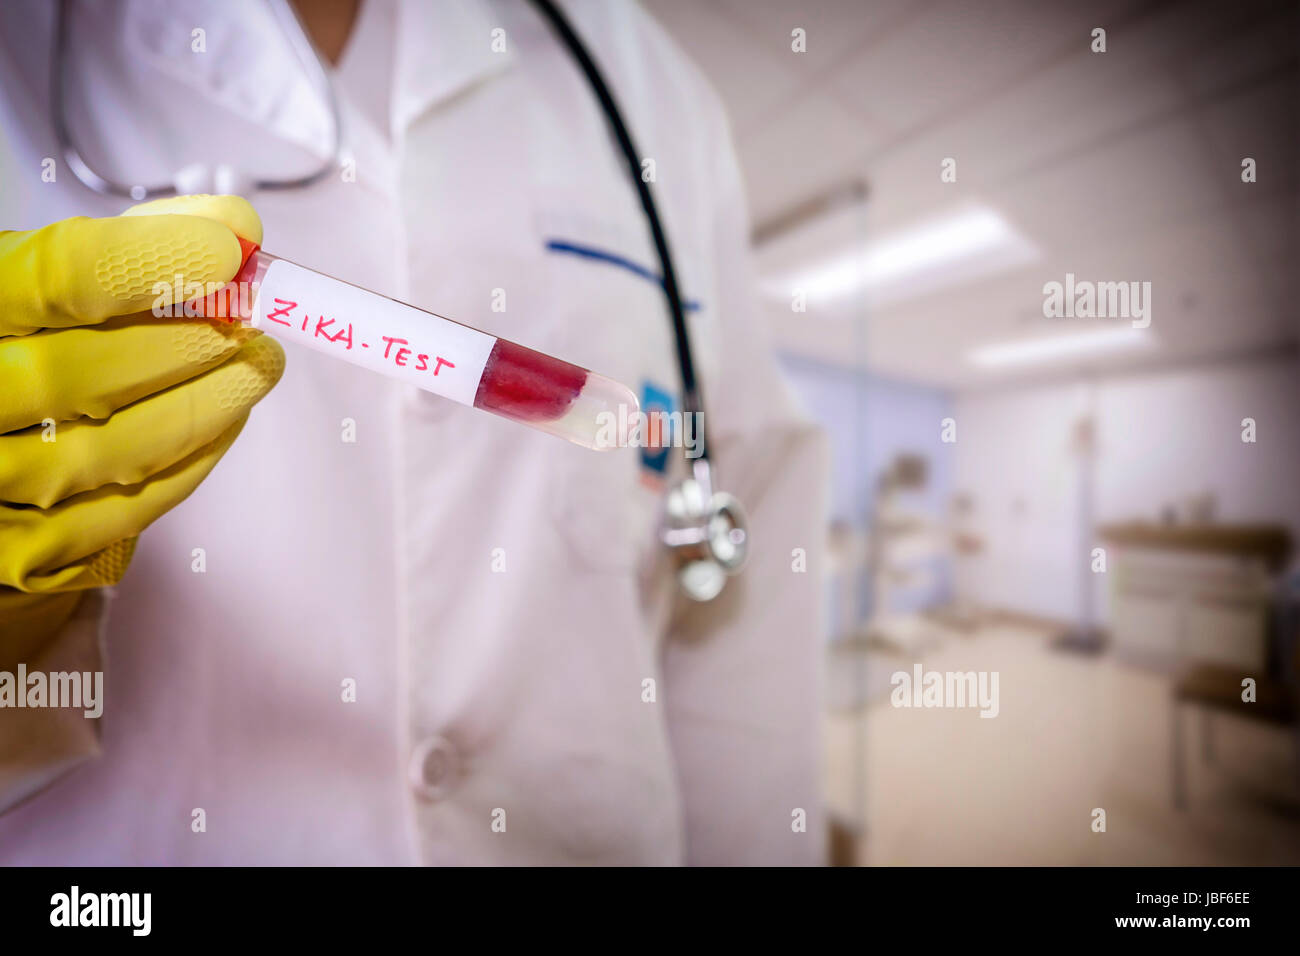 Tests For Research Of Zica virus (ZIKV) Stock Photo